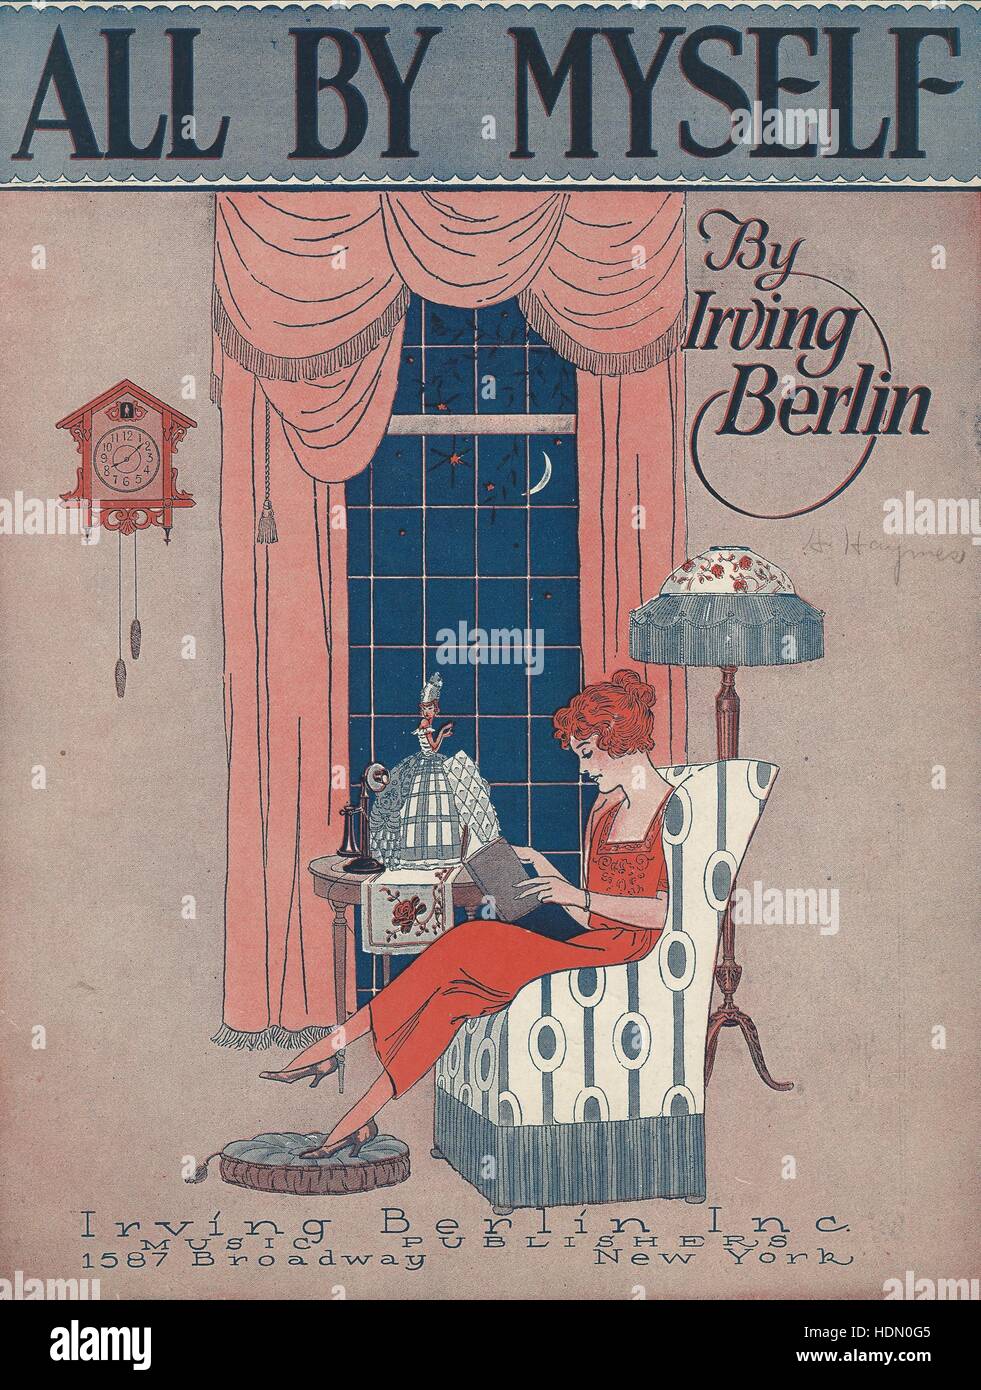 'All By Myself' Irving Berlin 1921 Sheet Music couvrir Banque D'Images